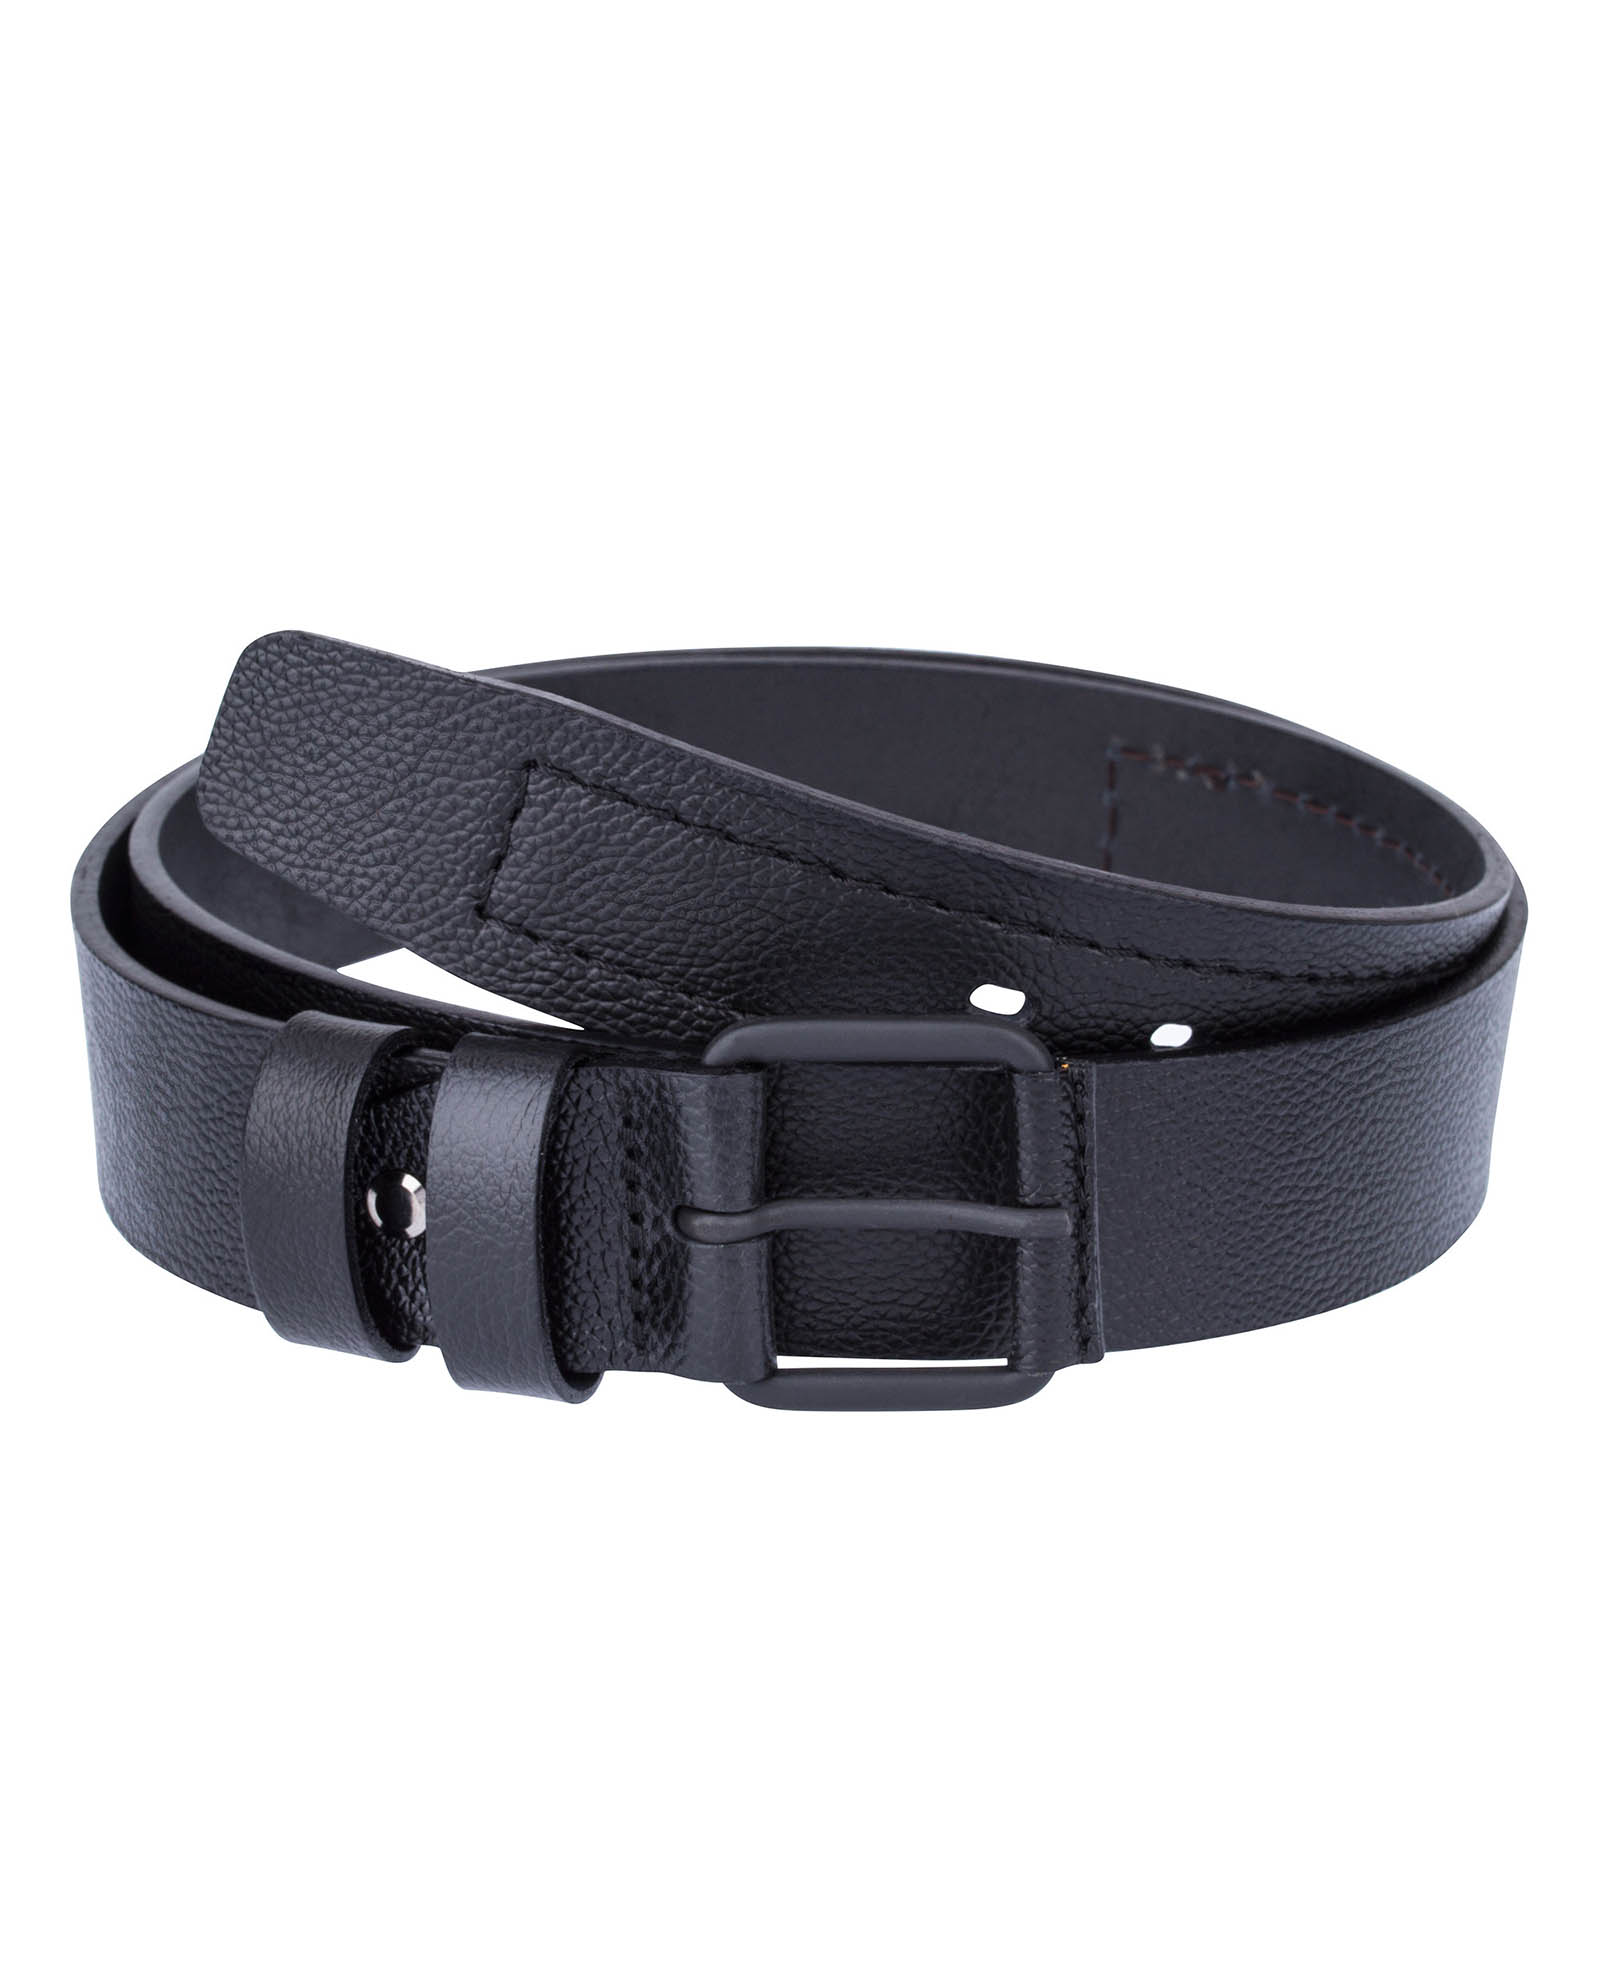 Buy Cow Thick Leather Belt | LeatherBeltsOnline.com | Free Shipping